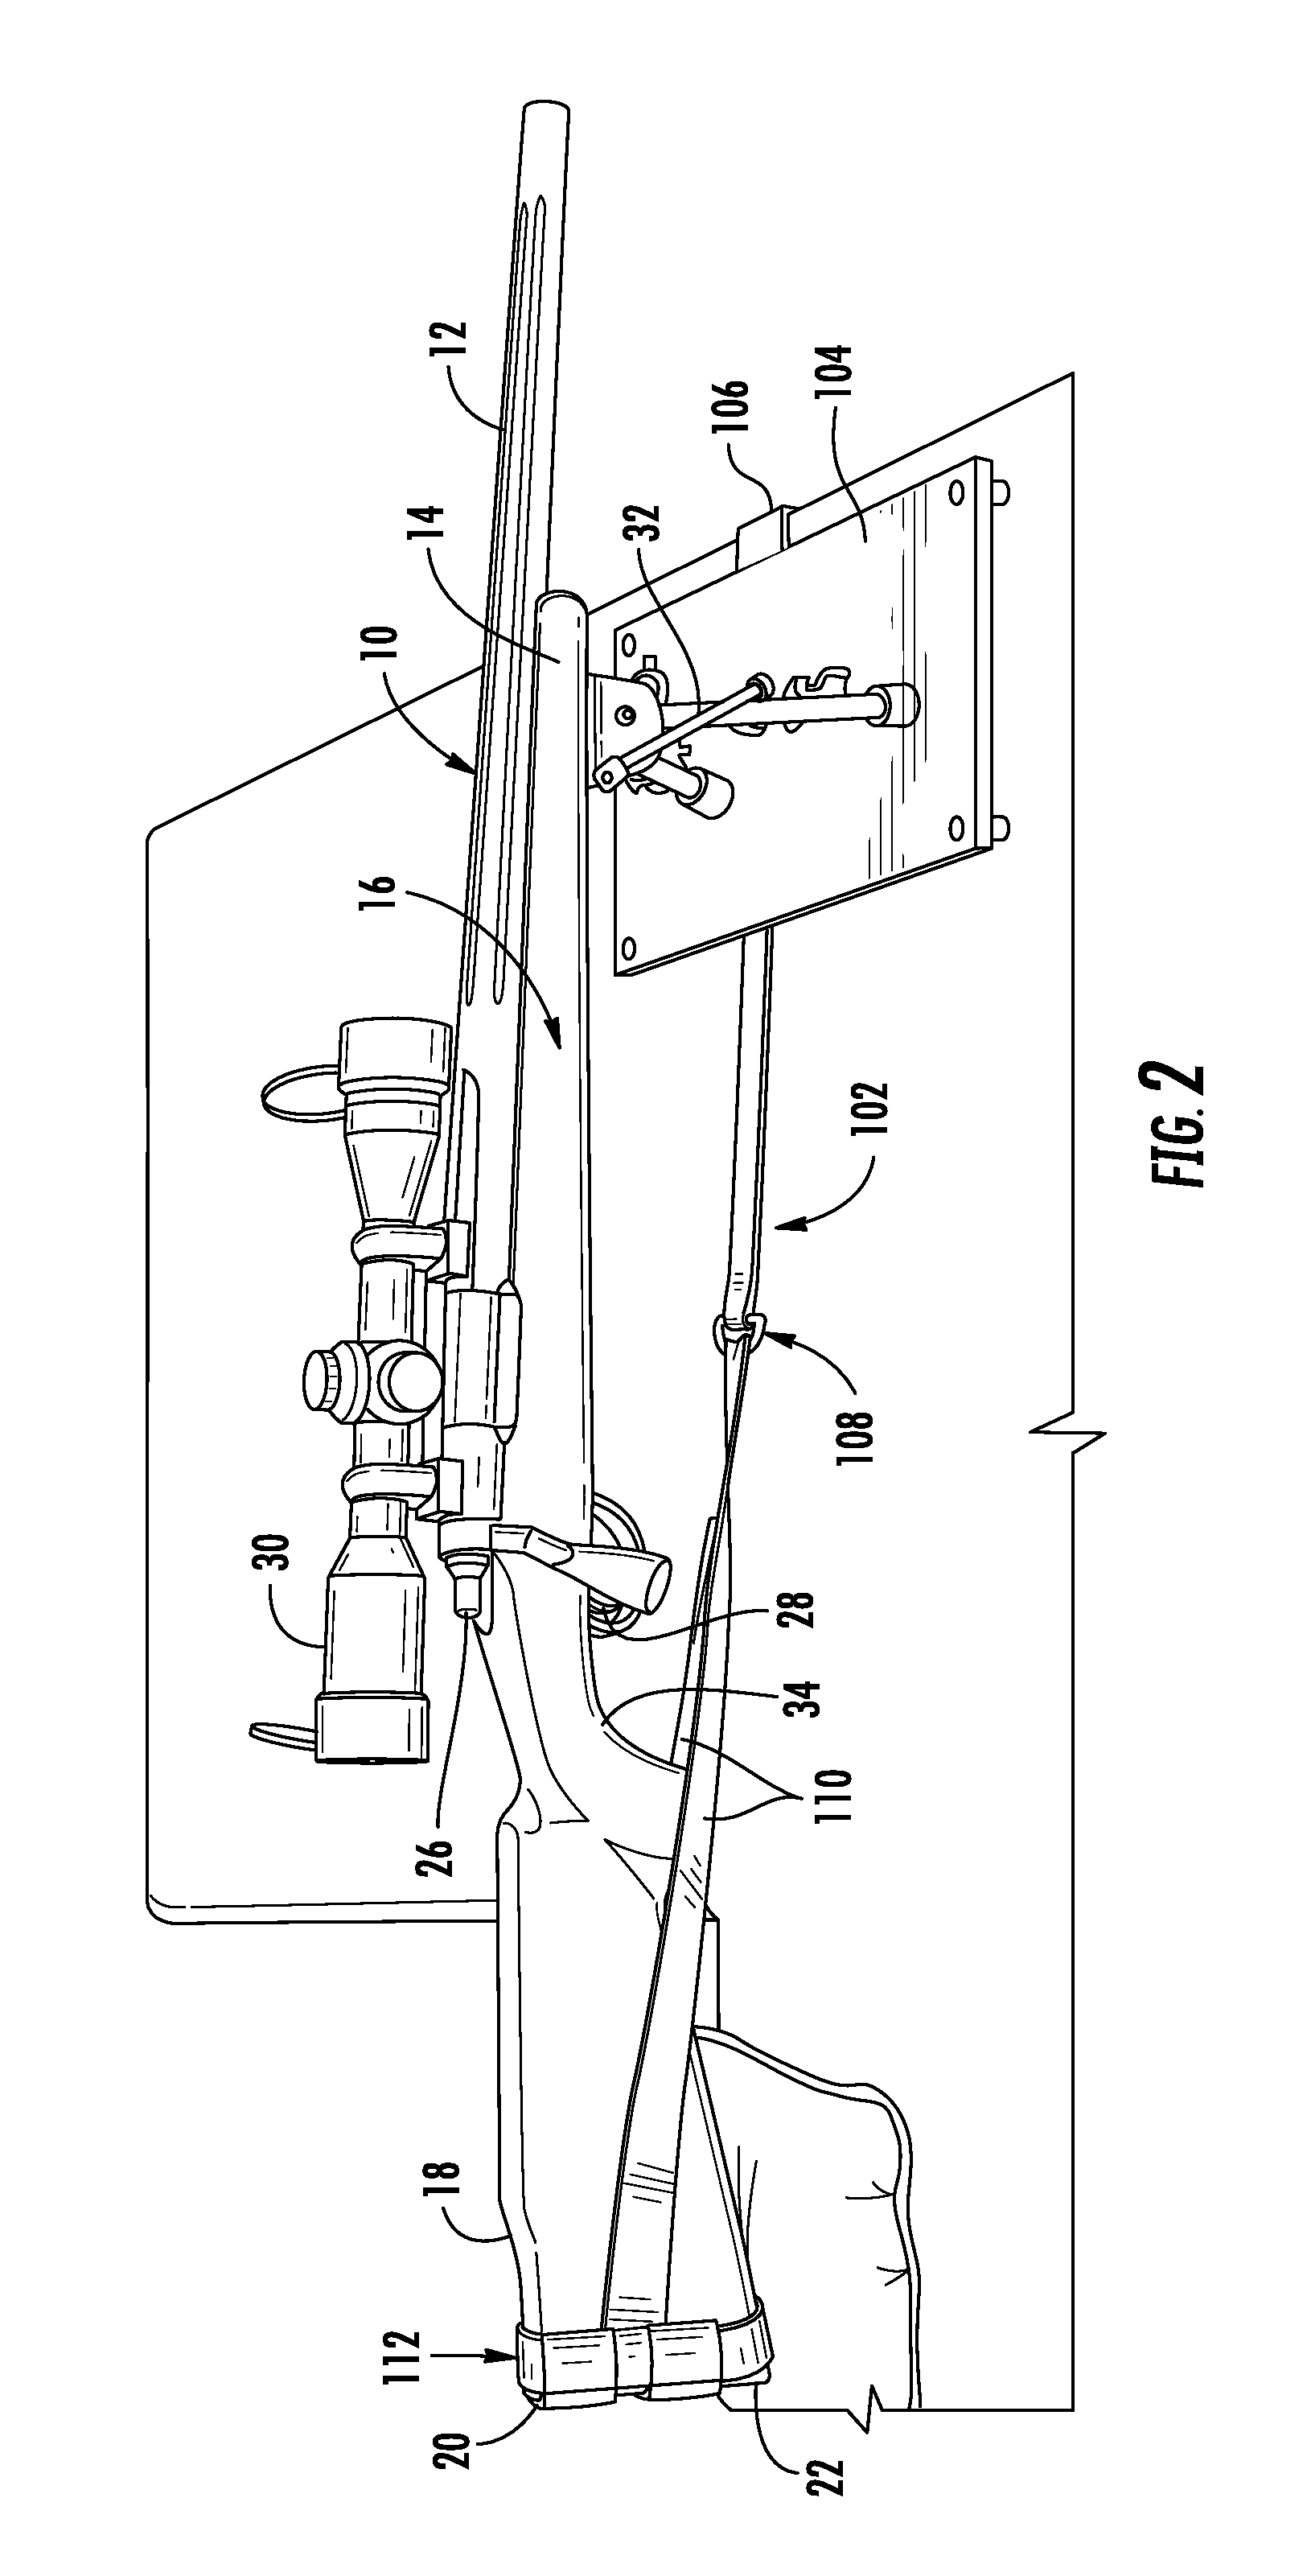 Recoil reduction and sighting-in system for a firearm